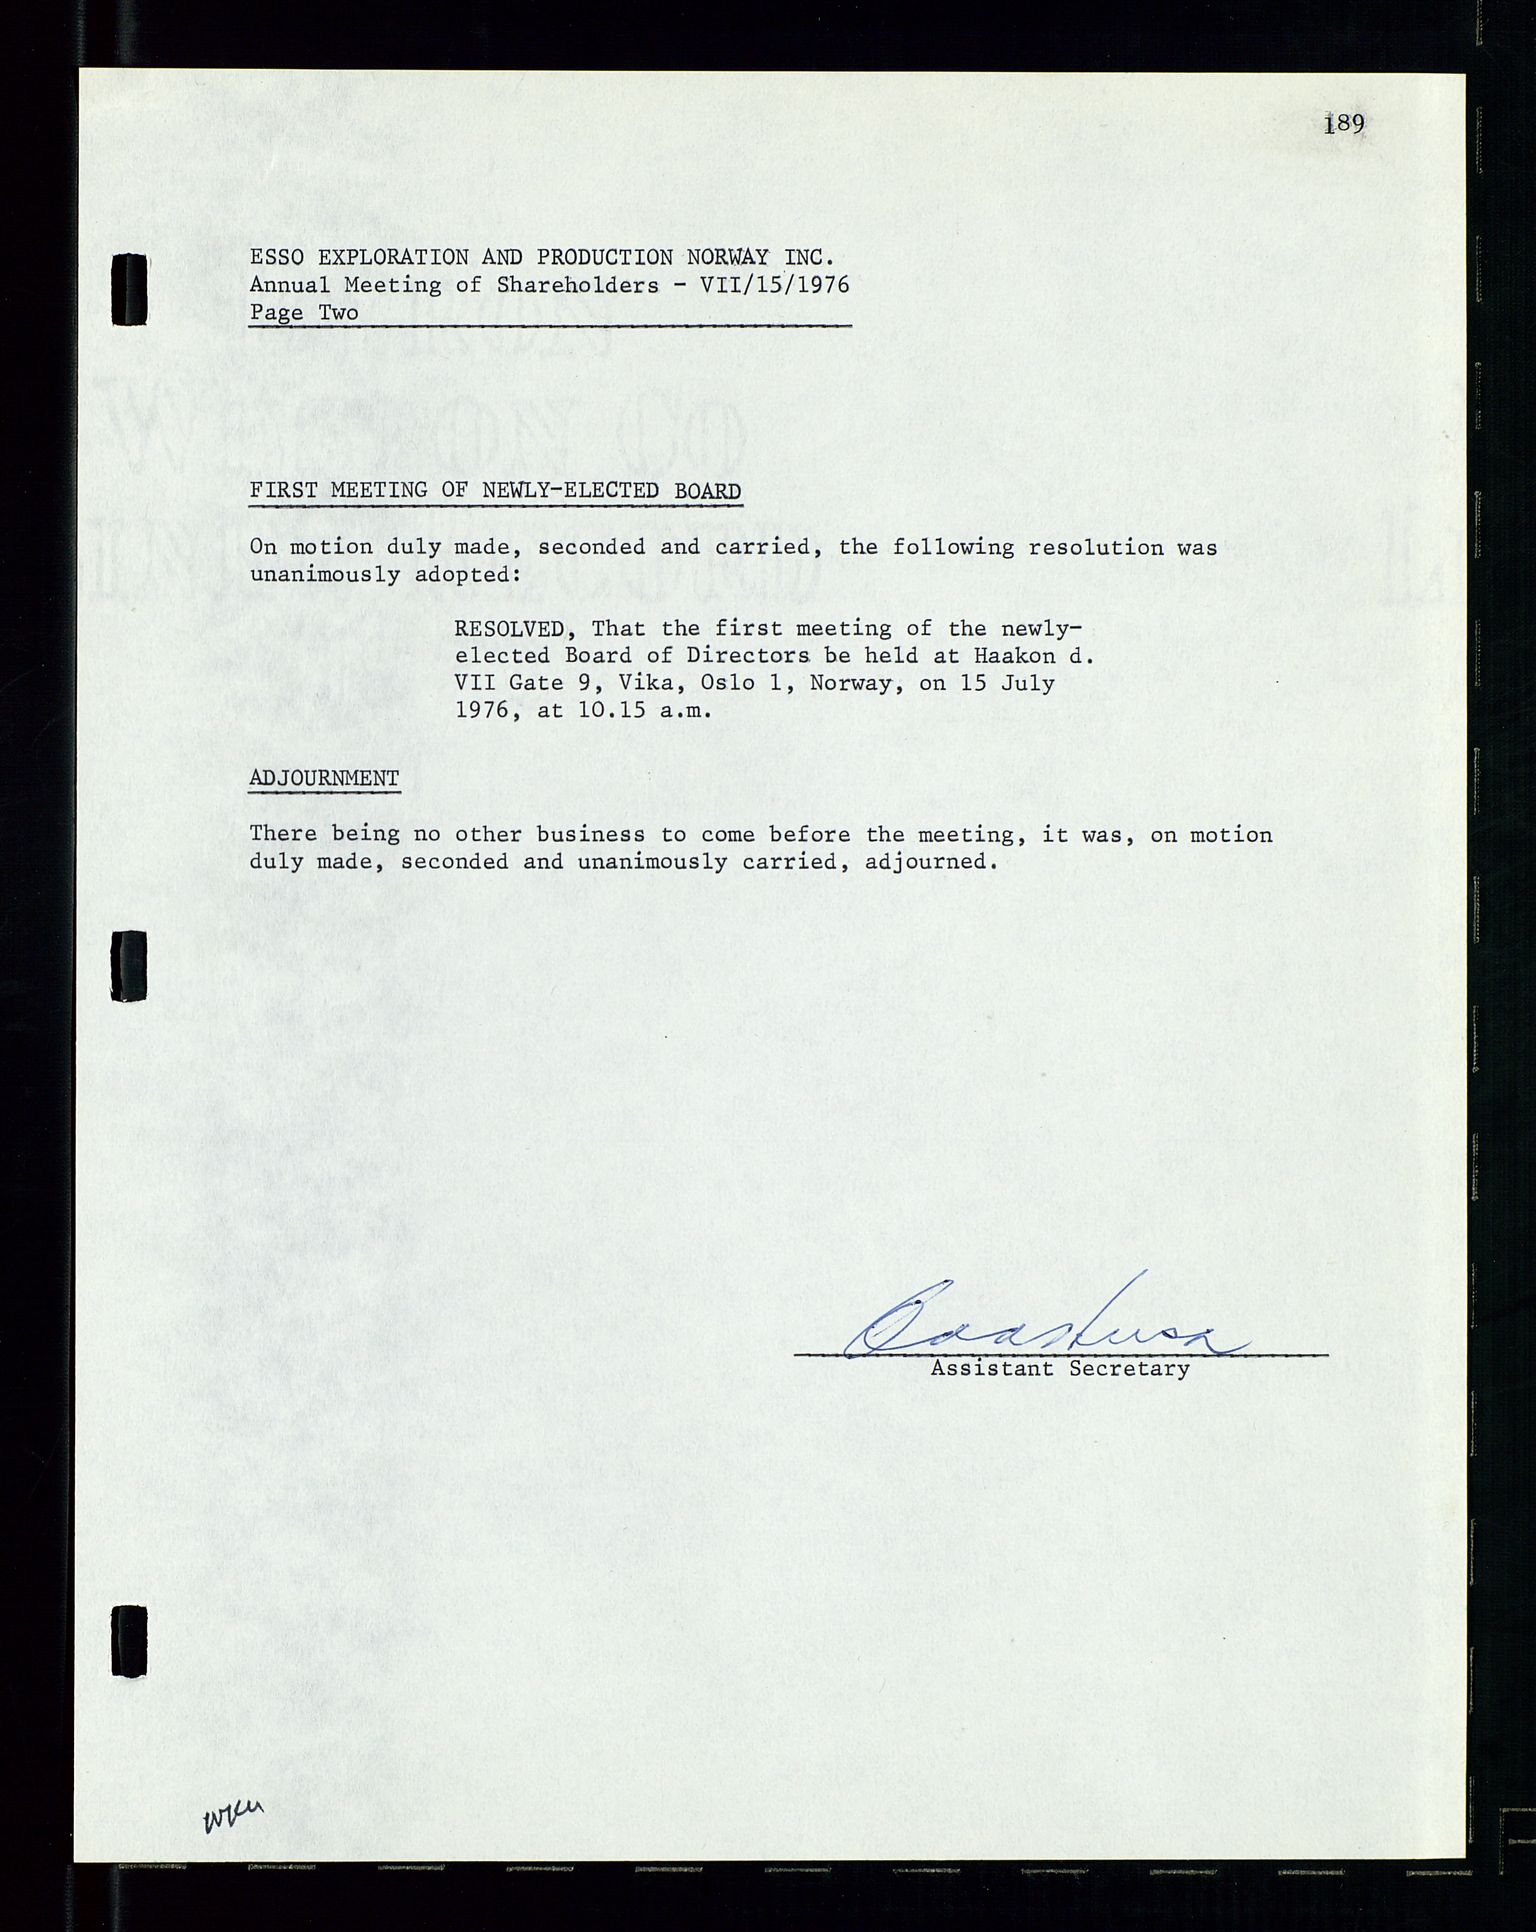 Pa 1512 - Esso Exploration and Production Norway Inc., SAST/A-101917/A/Aa/L0001/0002: Styredokumenter / Corporate records, Board meeting minutes, Agreements, Stocholder meetings, 1975-1979, s. 32